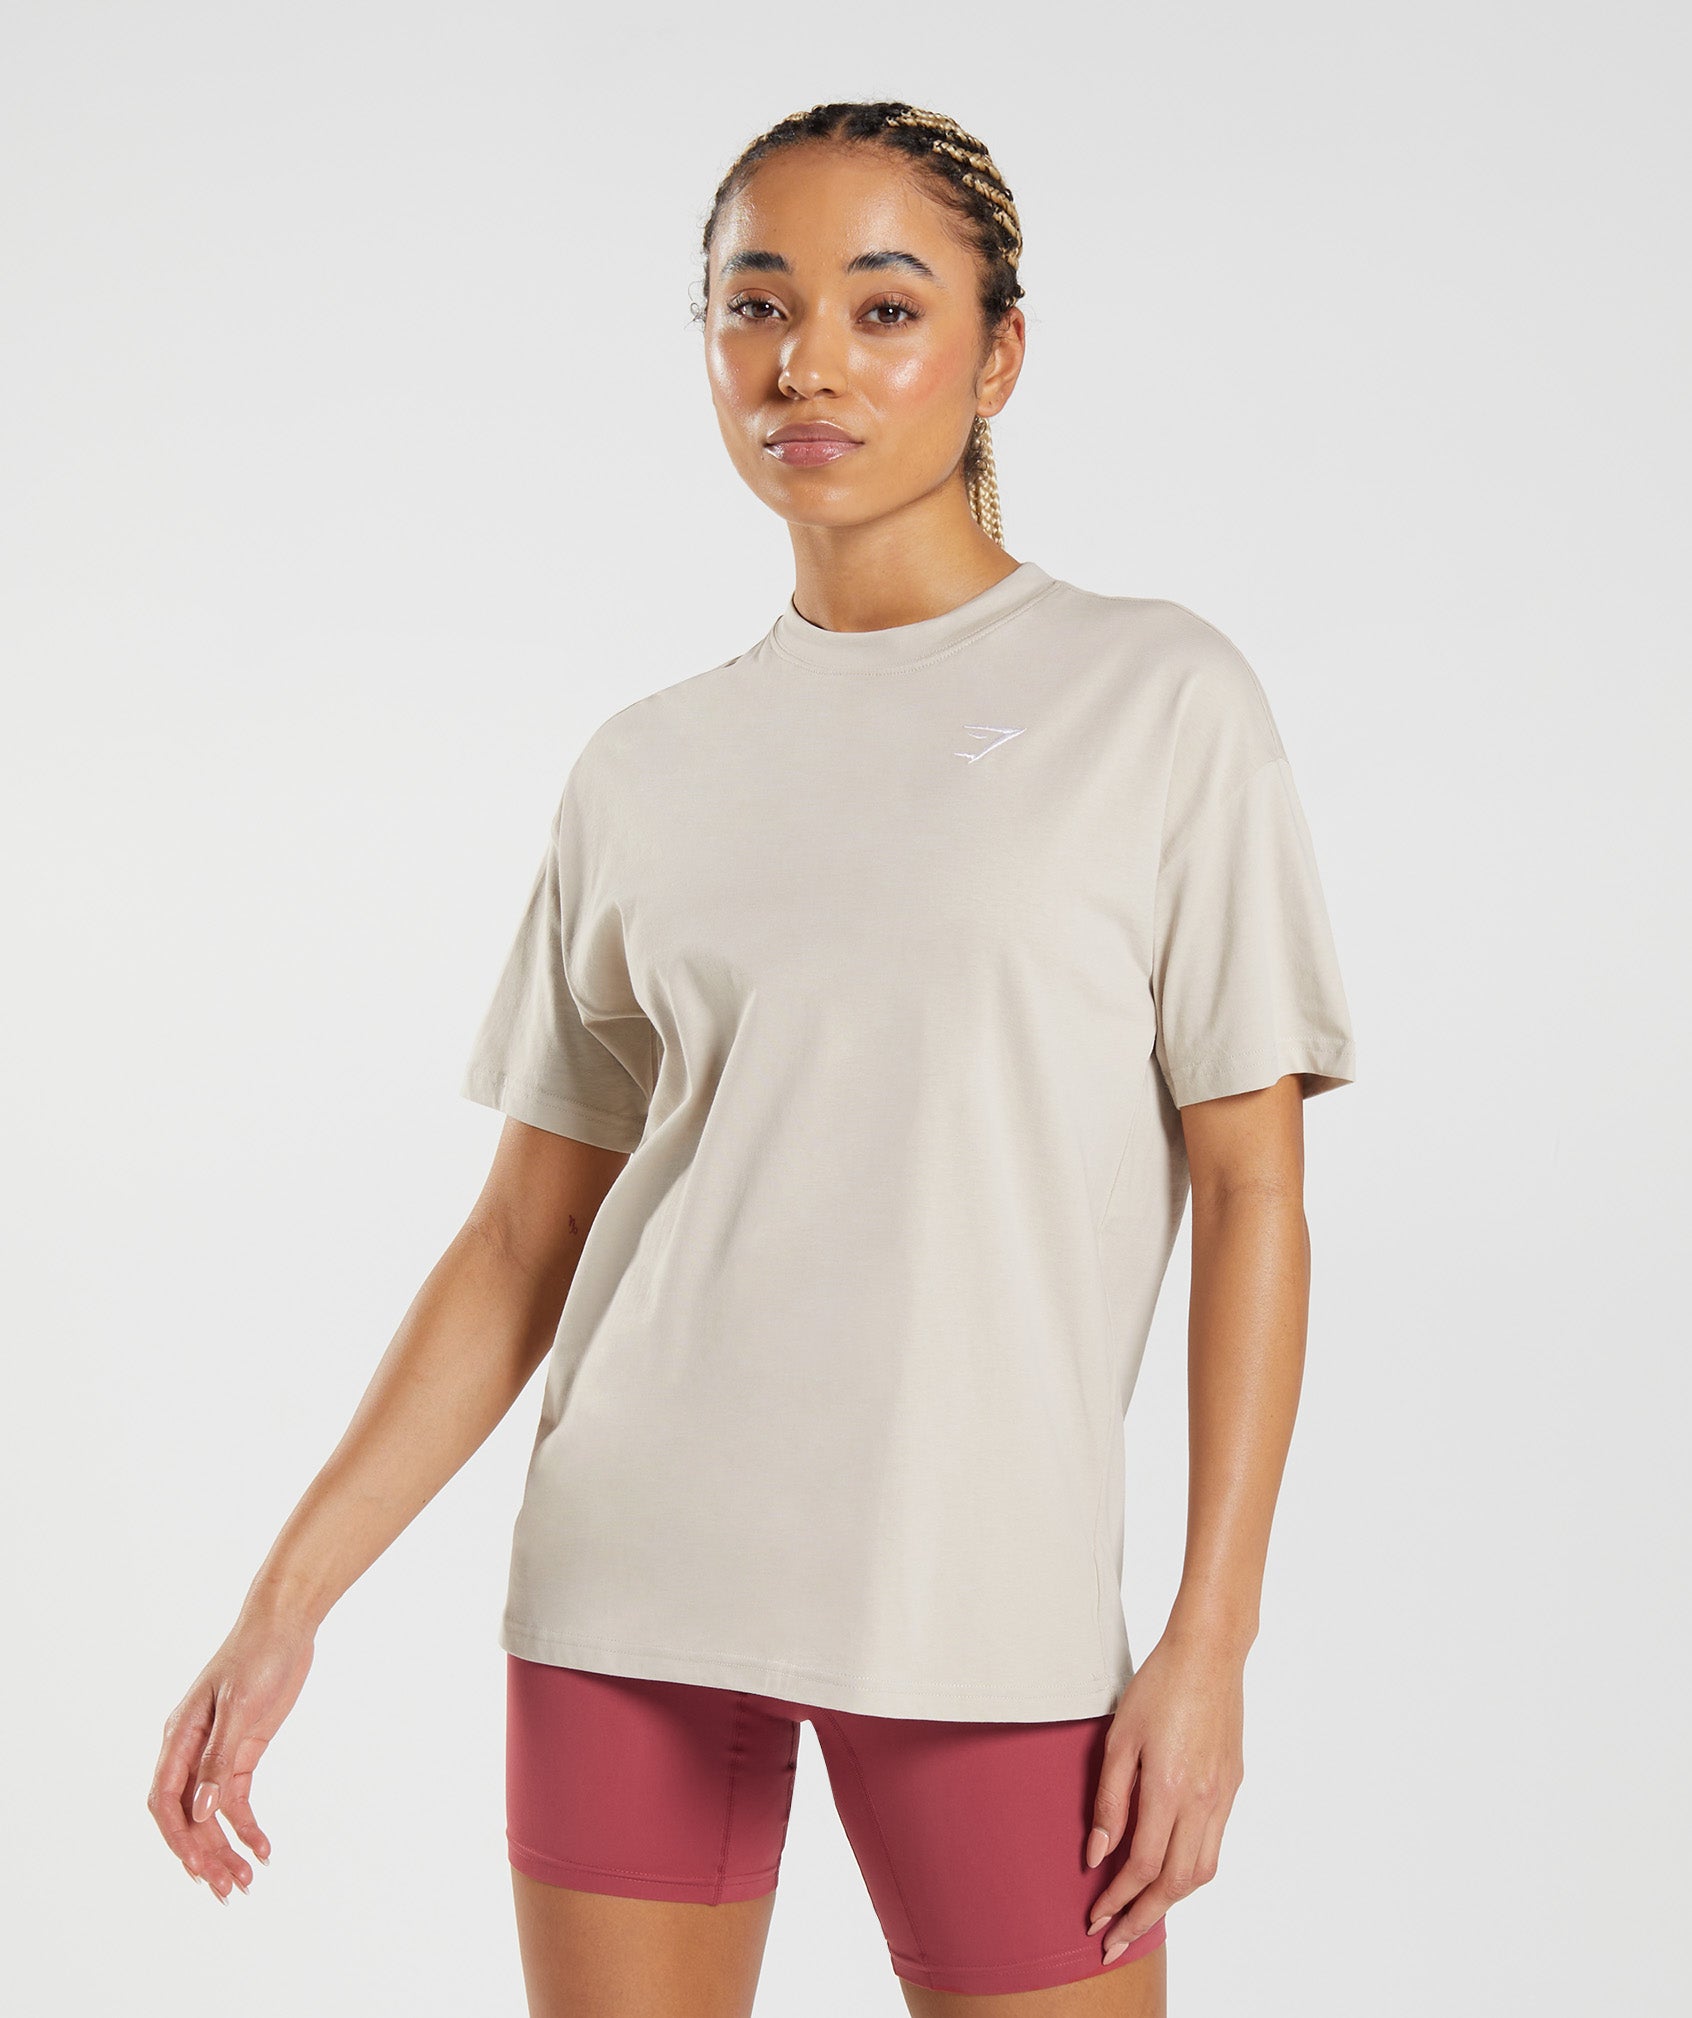 Training Oversized T-Shirt in Pebble Grey - view 1